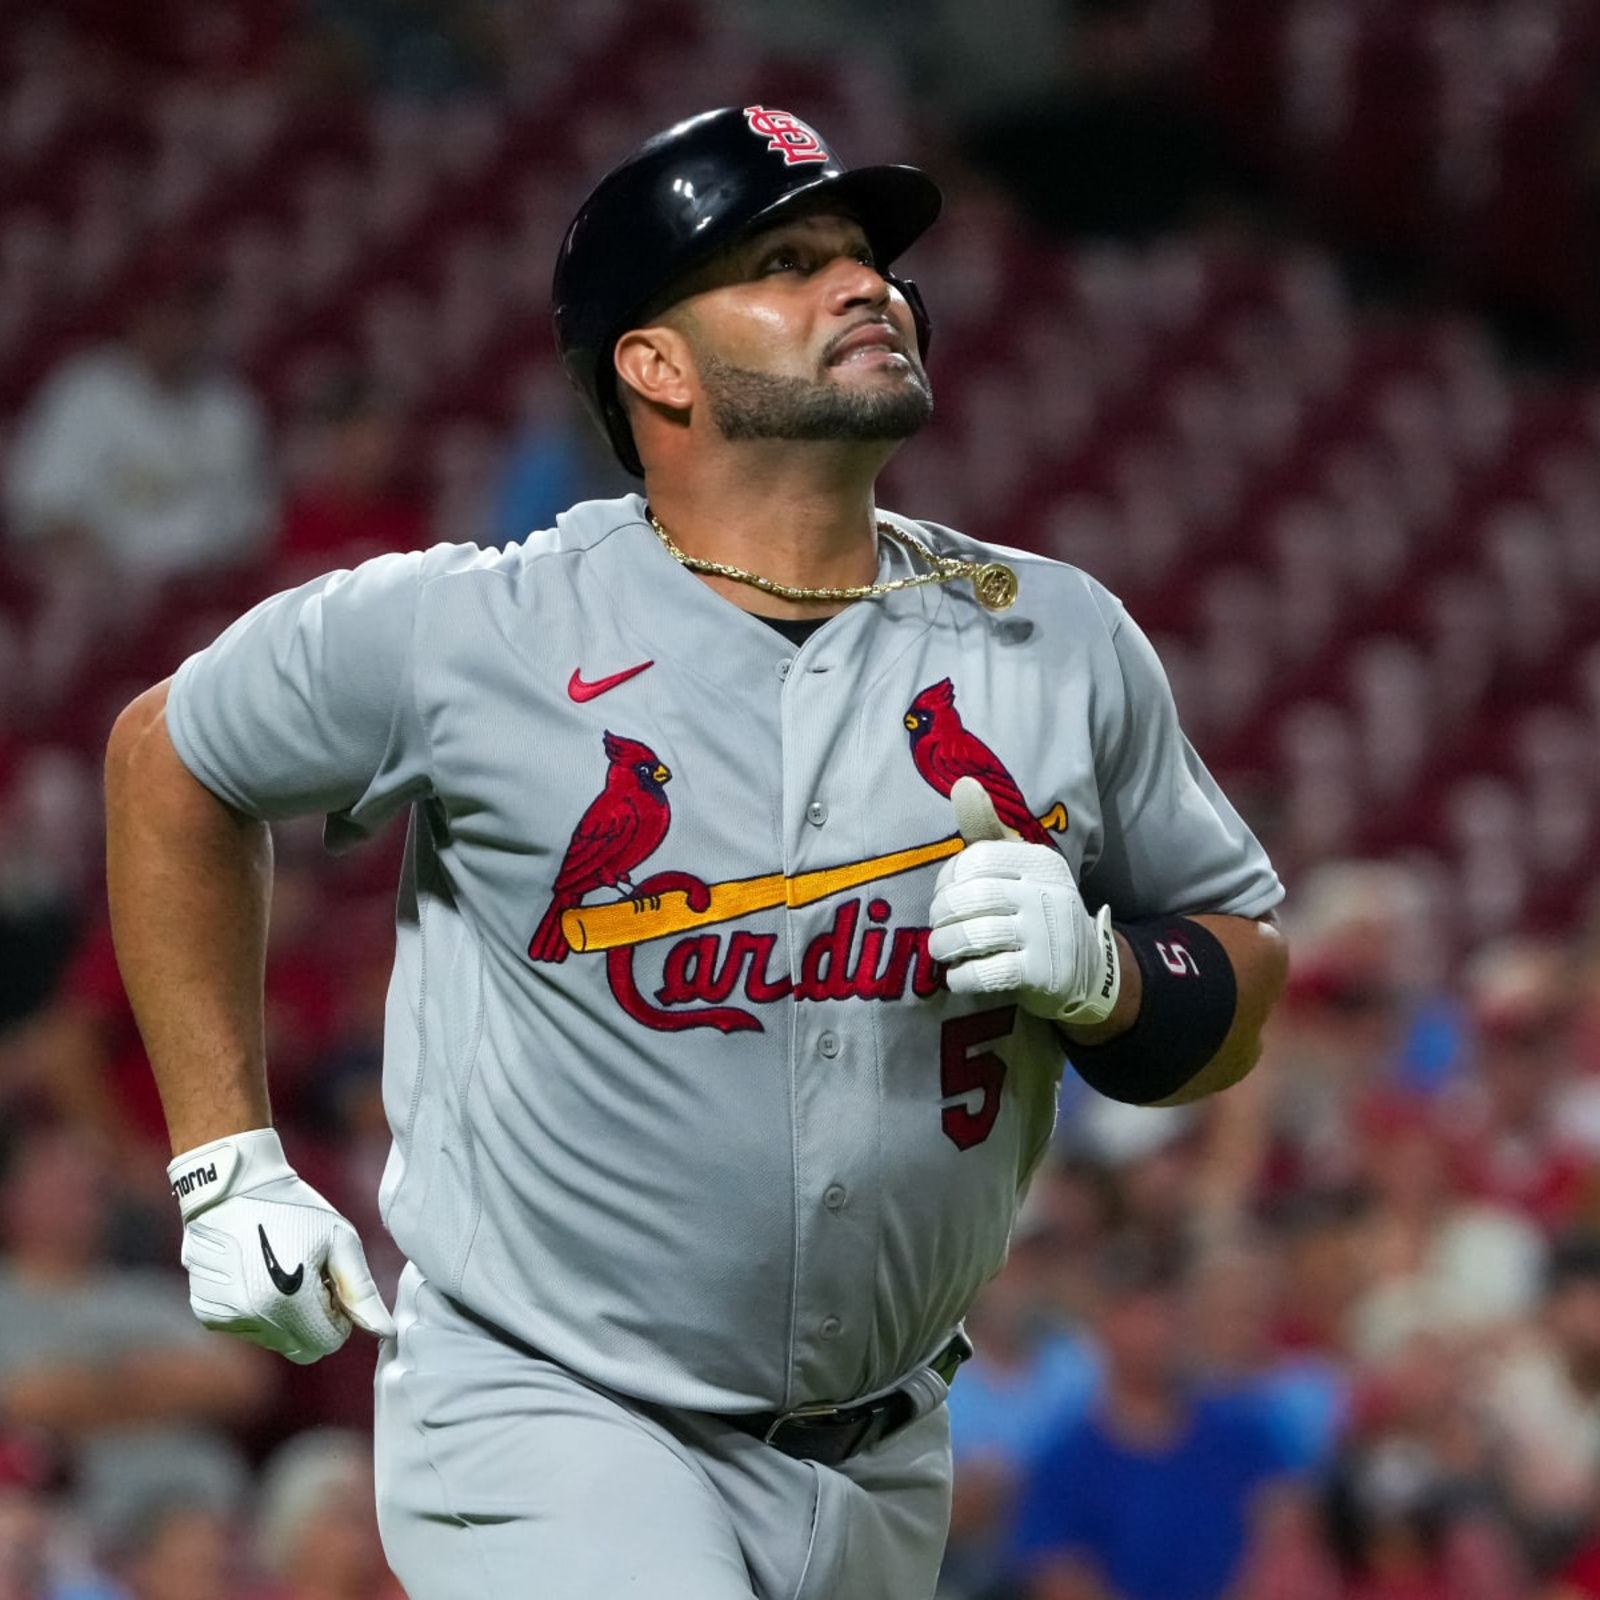 MLB - The Machine makes 4. Albert Pujols is officially a